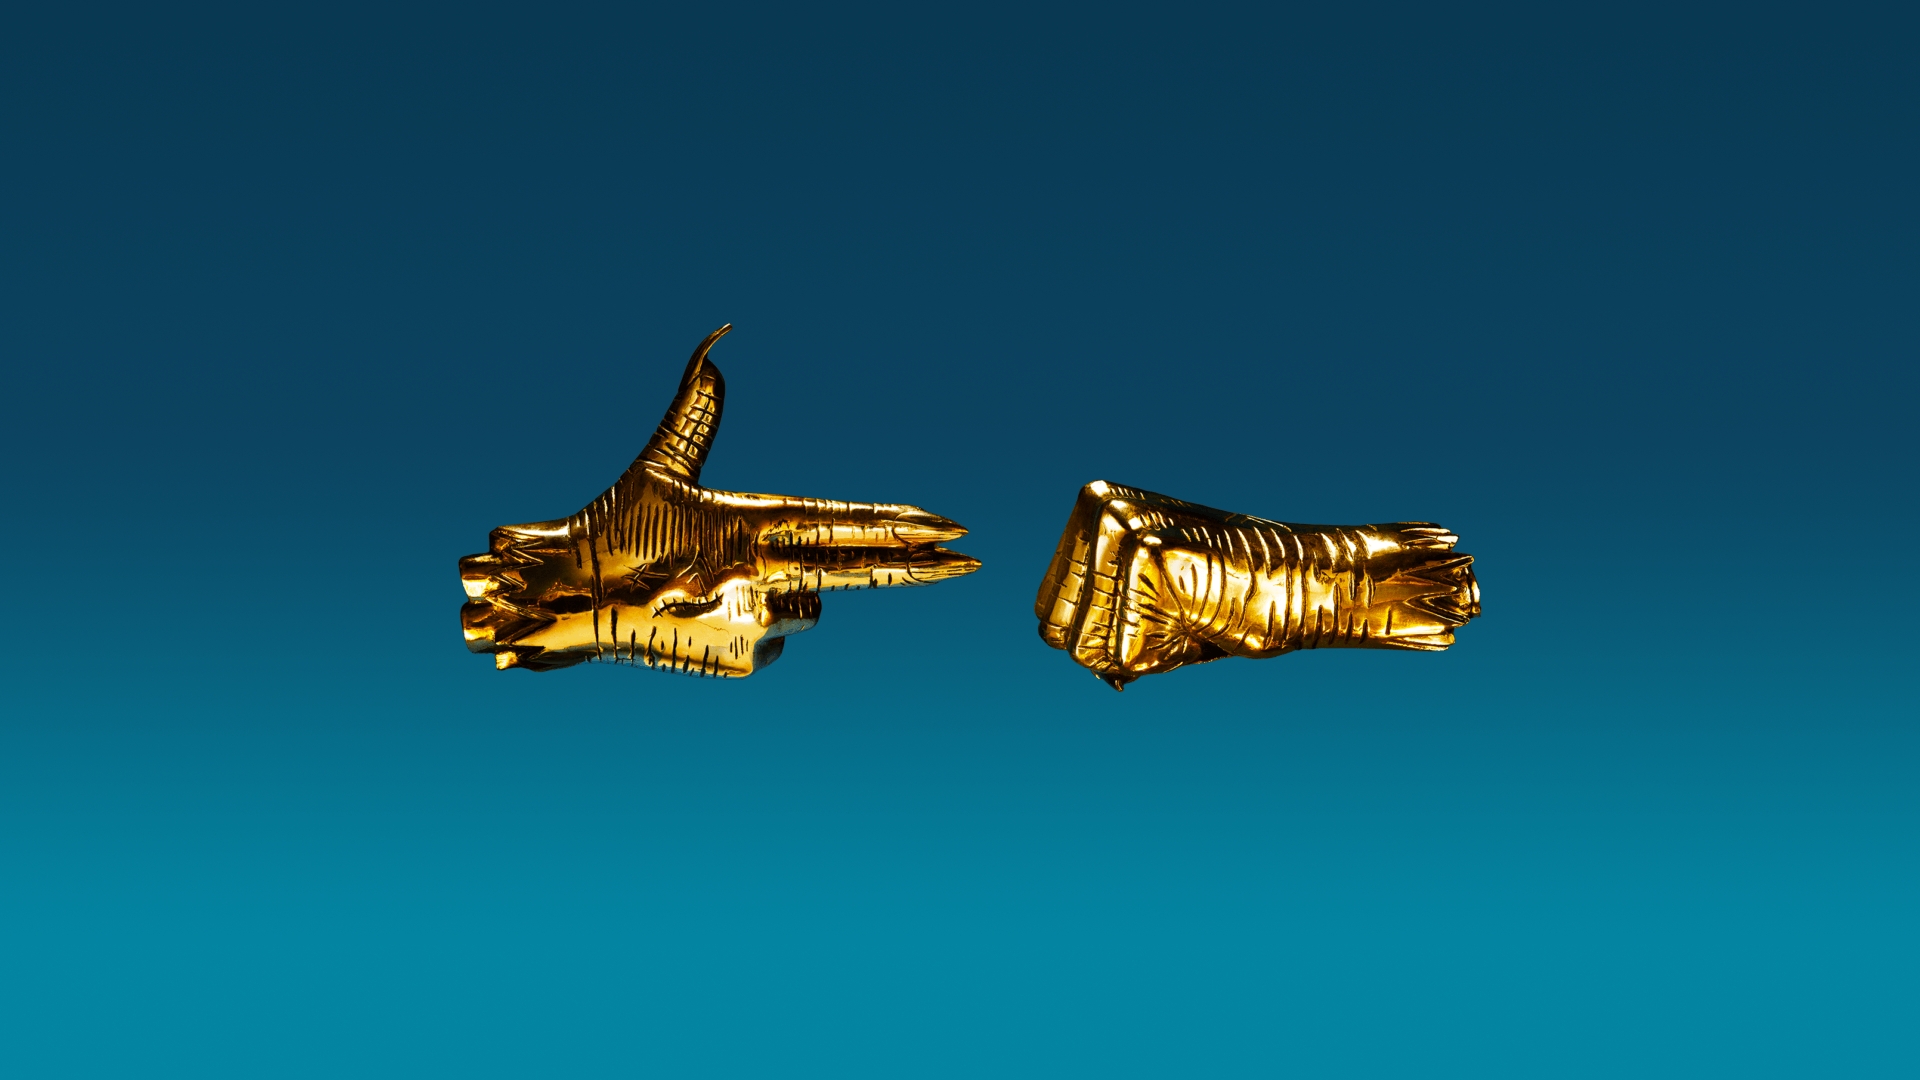 Free RTJ Desktop And Mobile Wallpaper Downloads   Run The Jewels